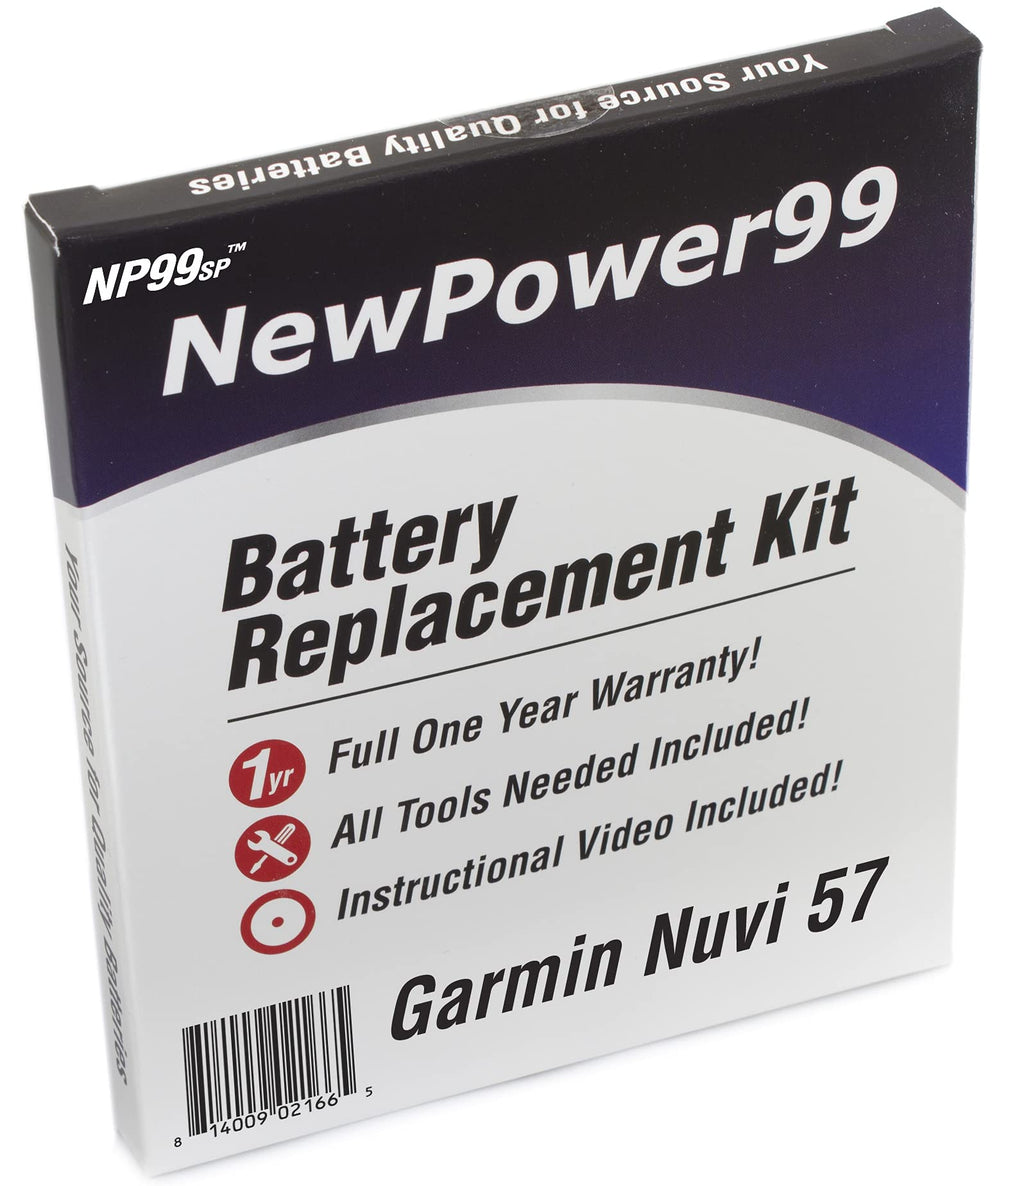 Battery Replacement Kit for Garmin Nuvi 57, 57LM, 57LMT with Video Instructions, Tools, and Extended Life Battery from NewPower99